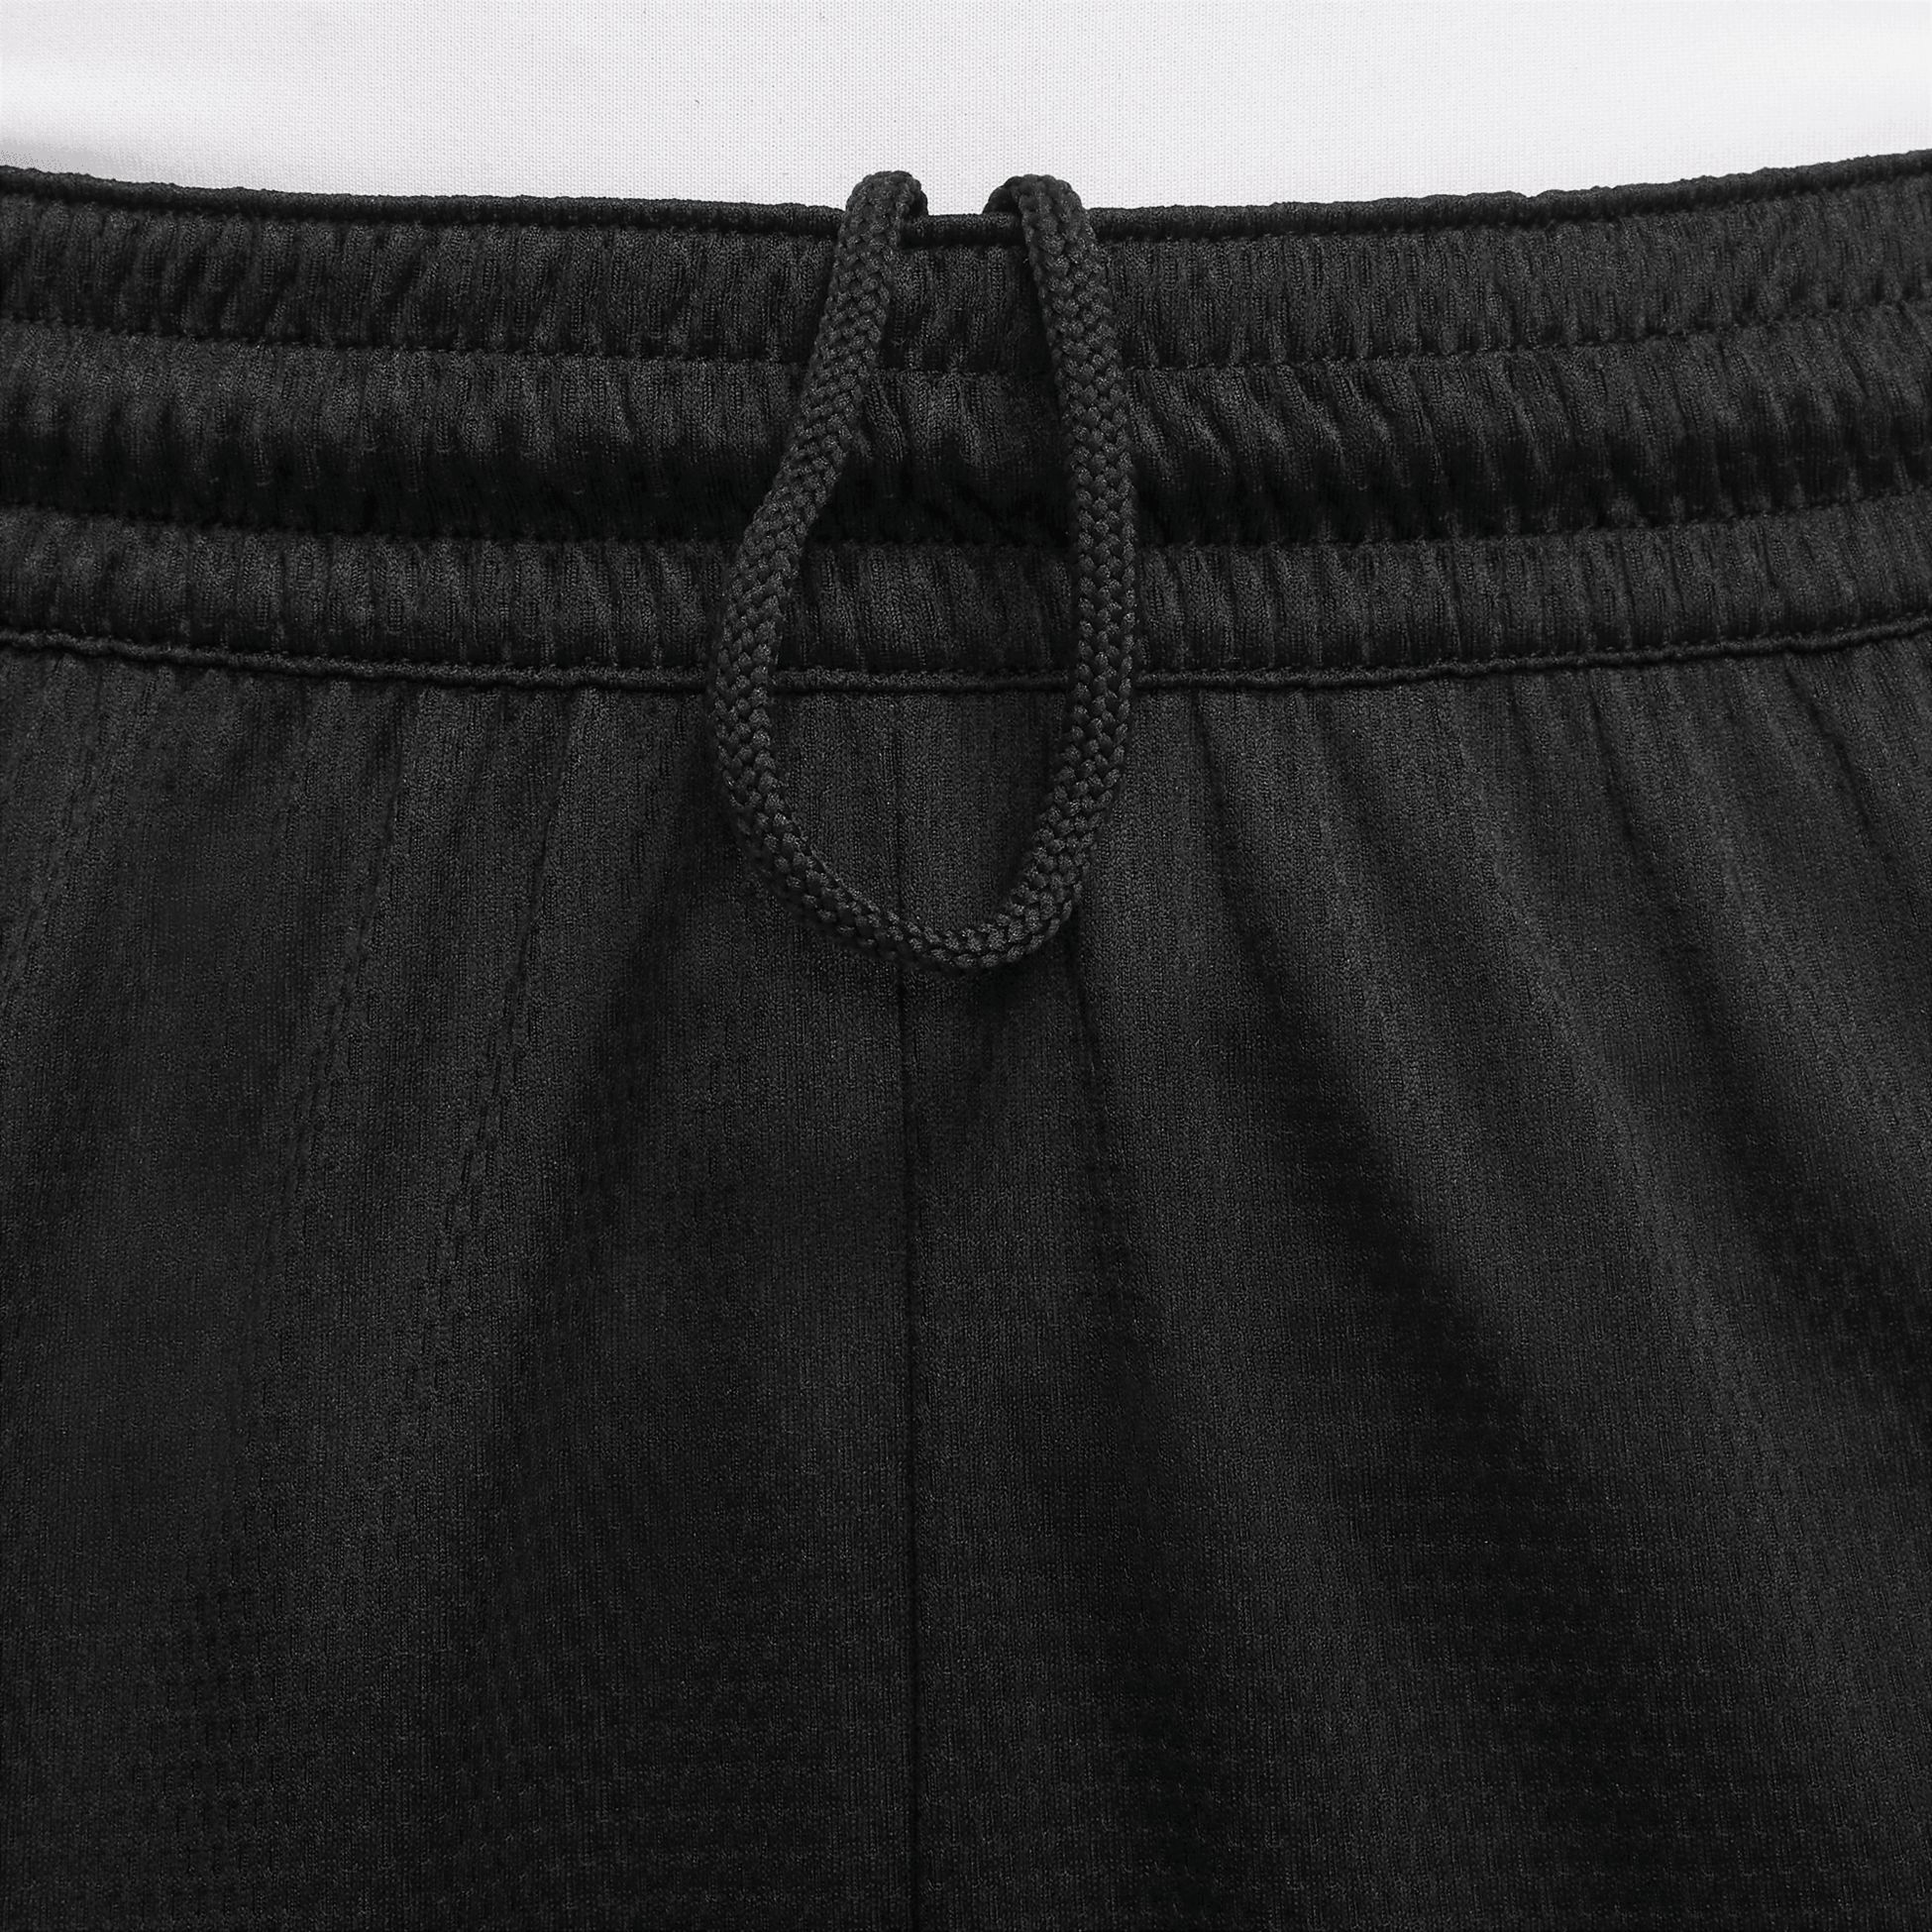 NIKE, M NK DF ICON 8IN SHORT